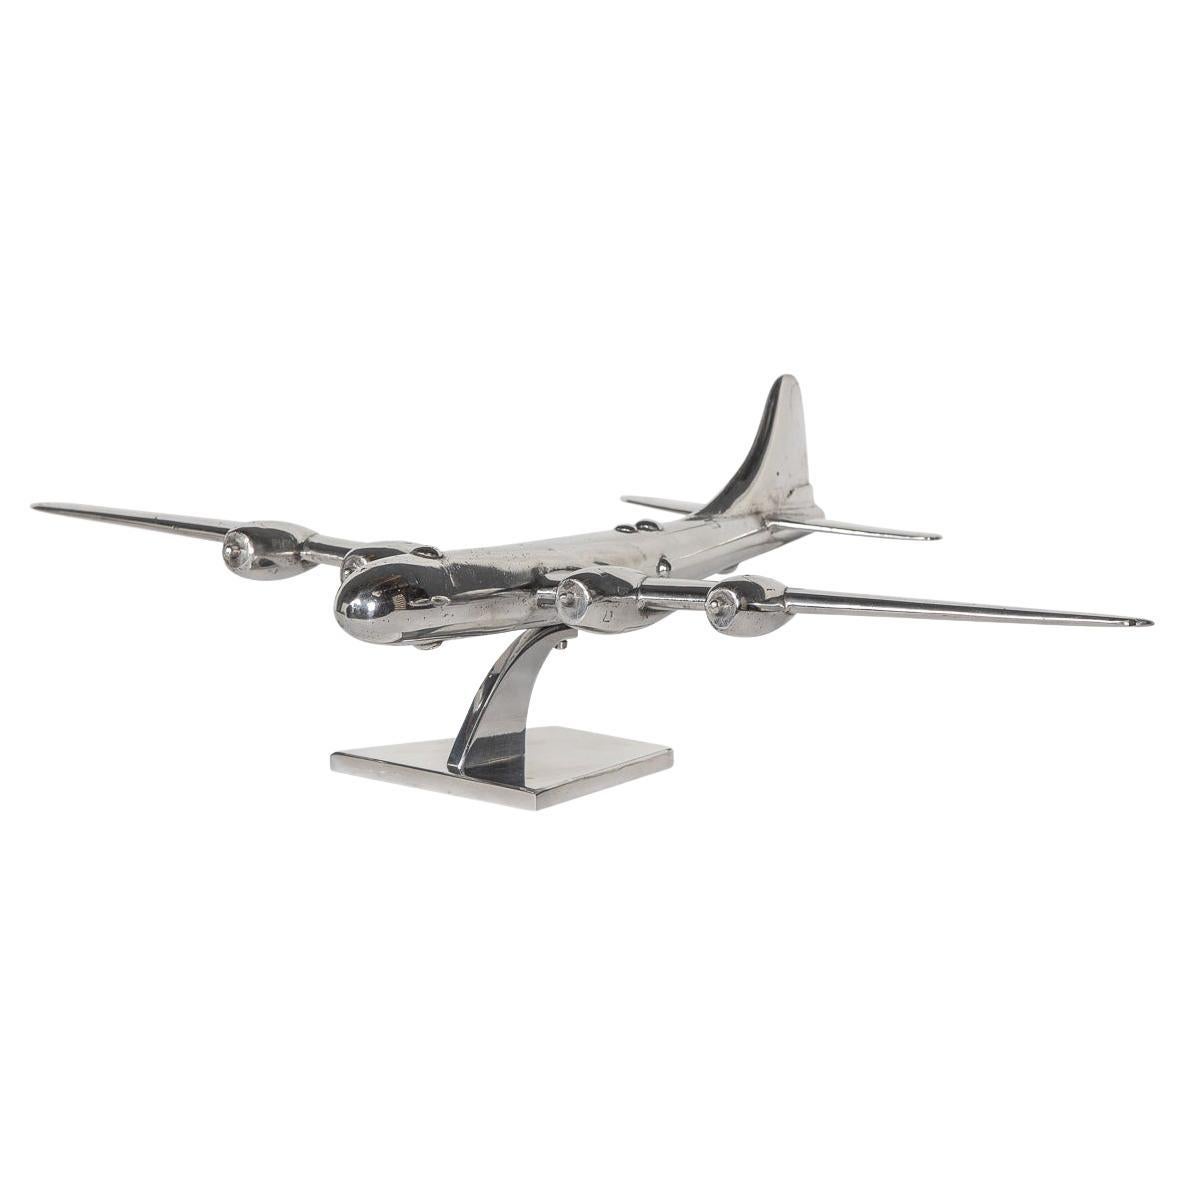 20thC Model Of An American Boeing B-29 Superfortress Bomber Airplane, c.1970